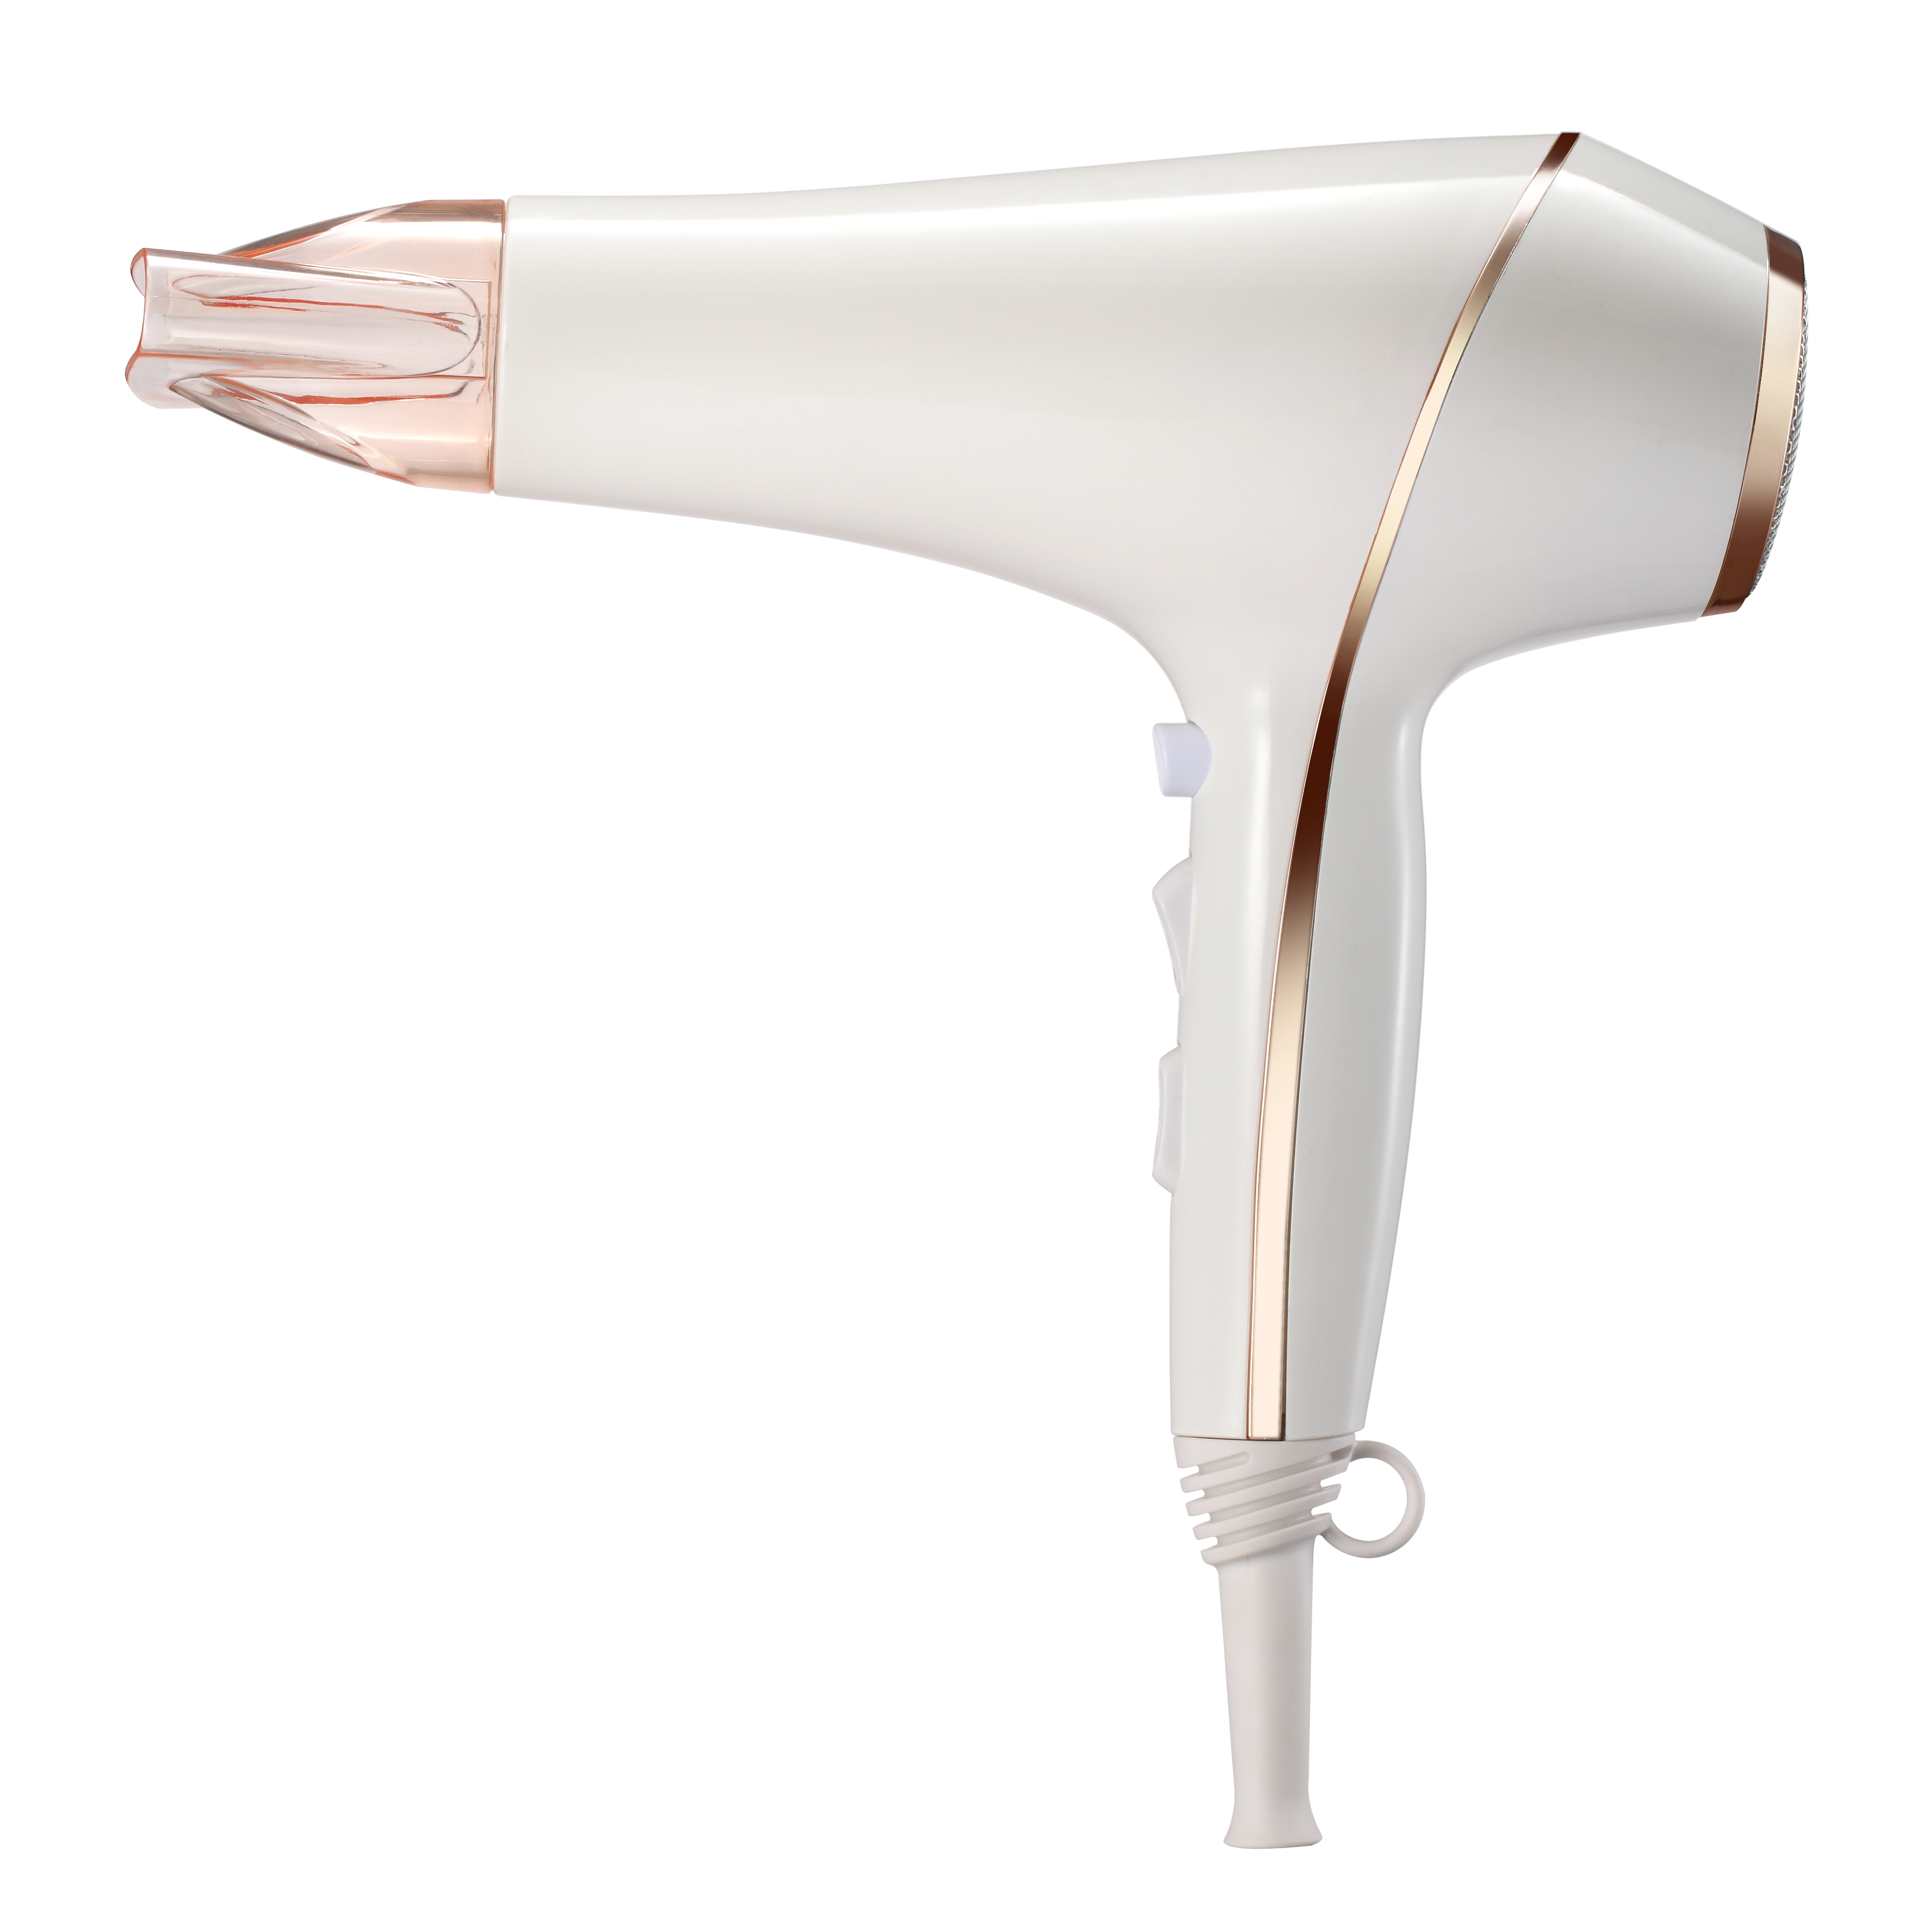 Professional DC hair dryer with cool snap button